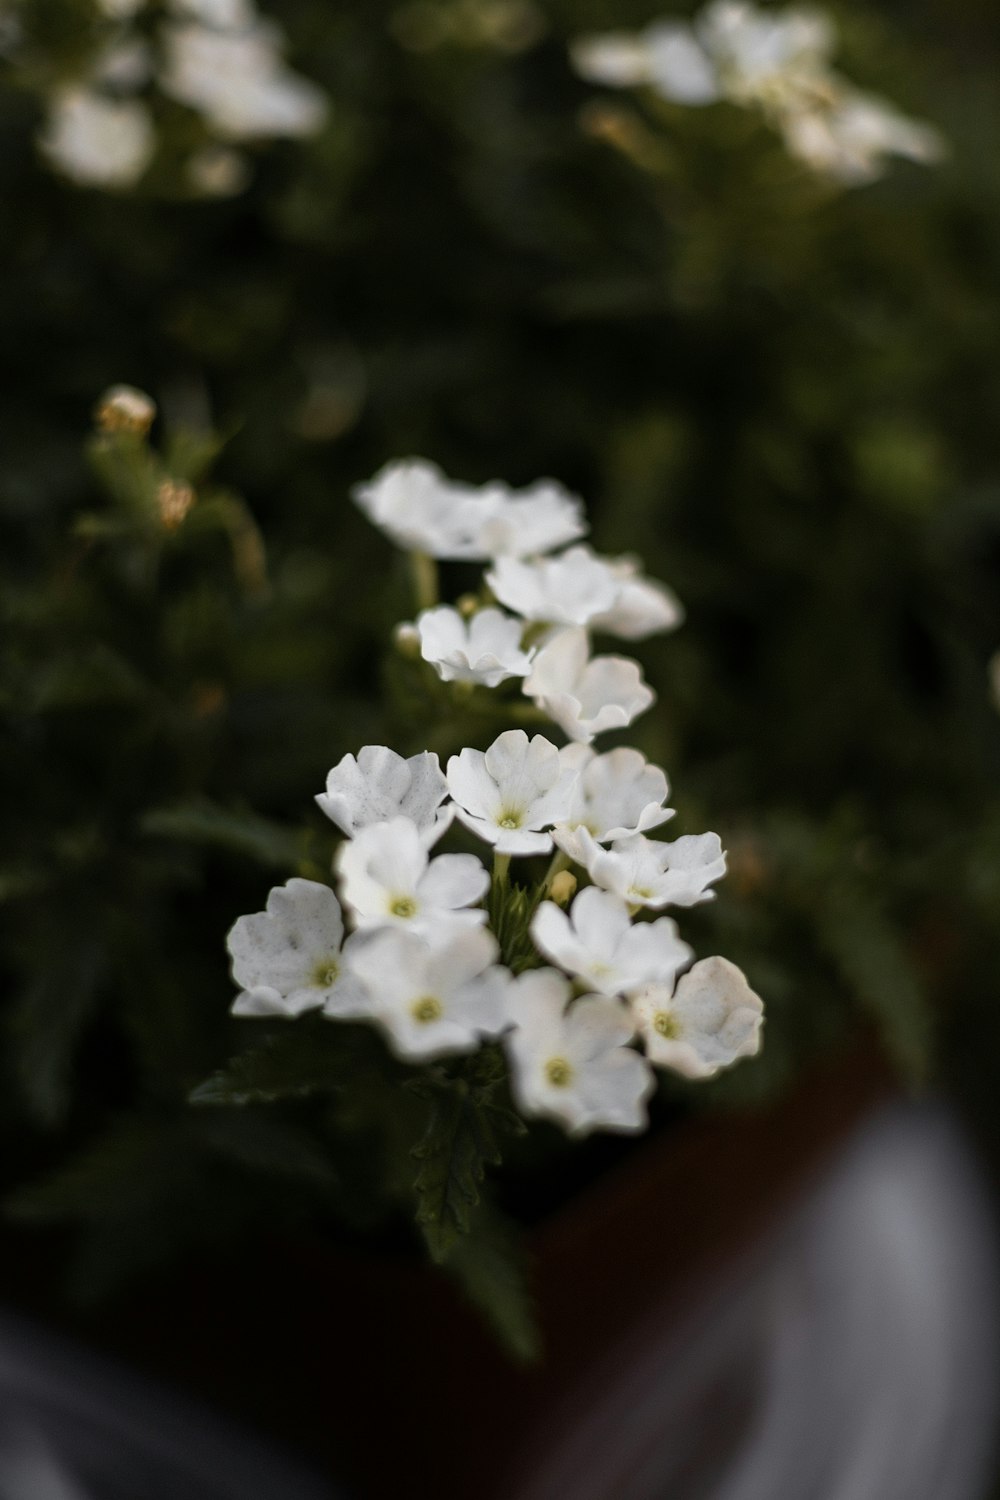 small white flowers in a pot on a table